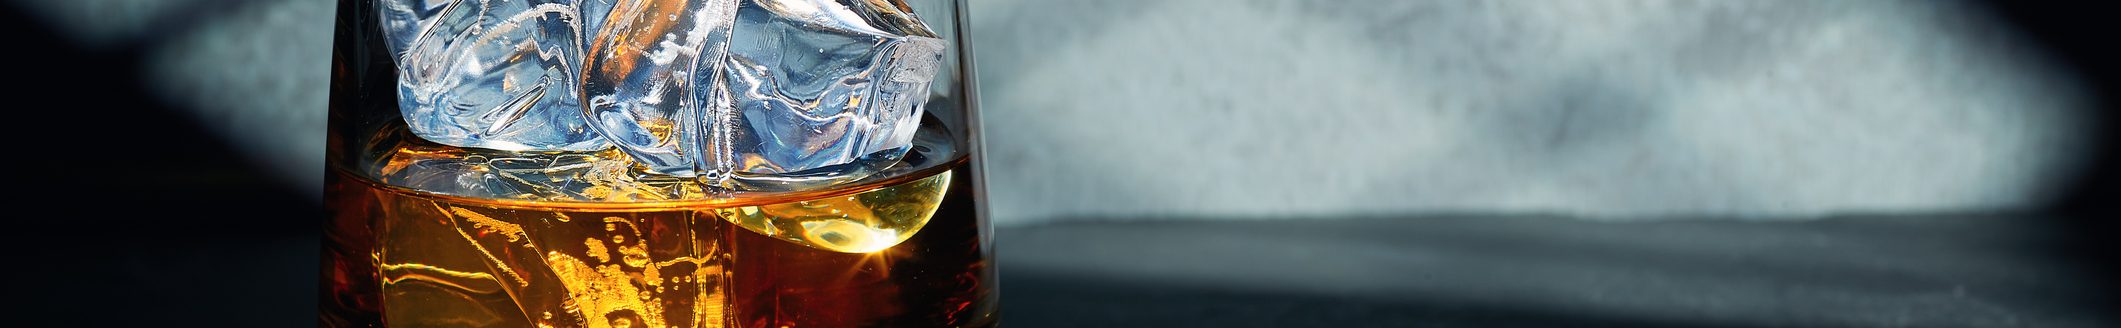 Late night glass of malt whisky with ice on a slate table with moonlight through the window on the wall behind. (Photo: iStock - lucentius)